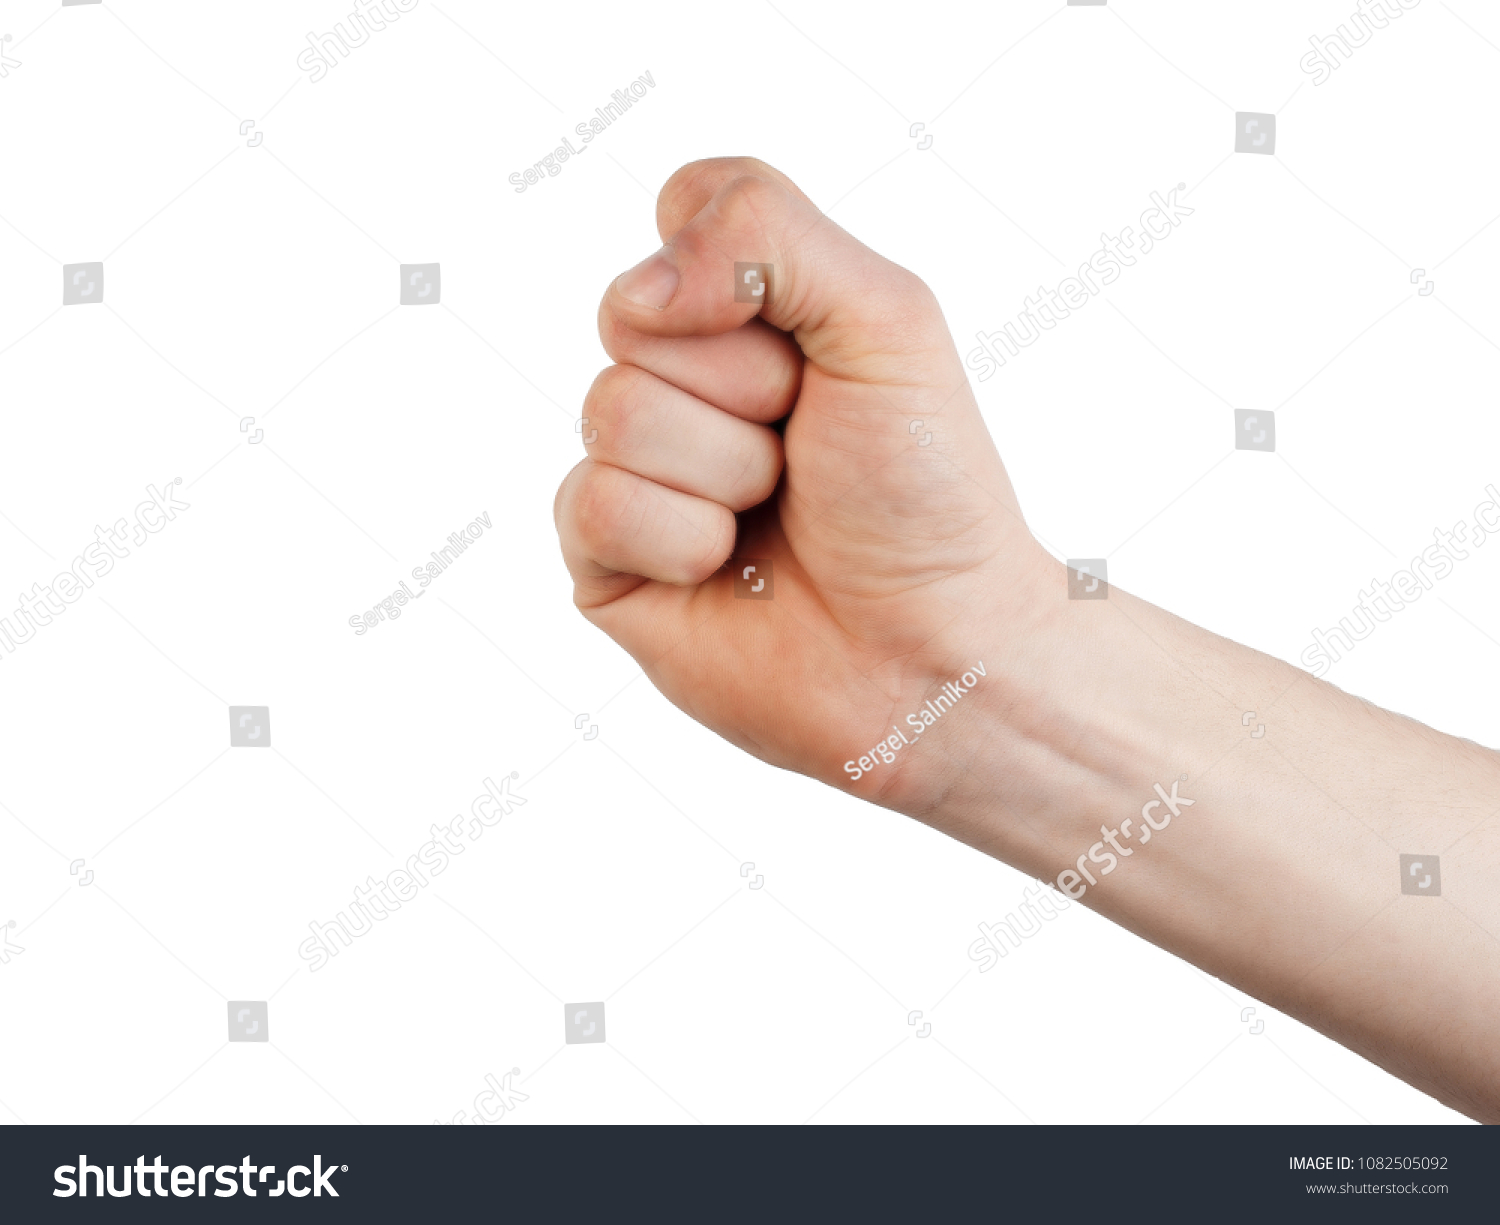 Hand showing gestures on a white background #1082505092